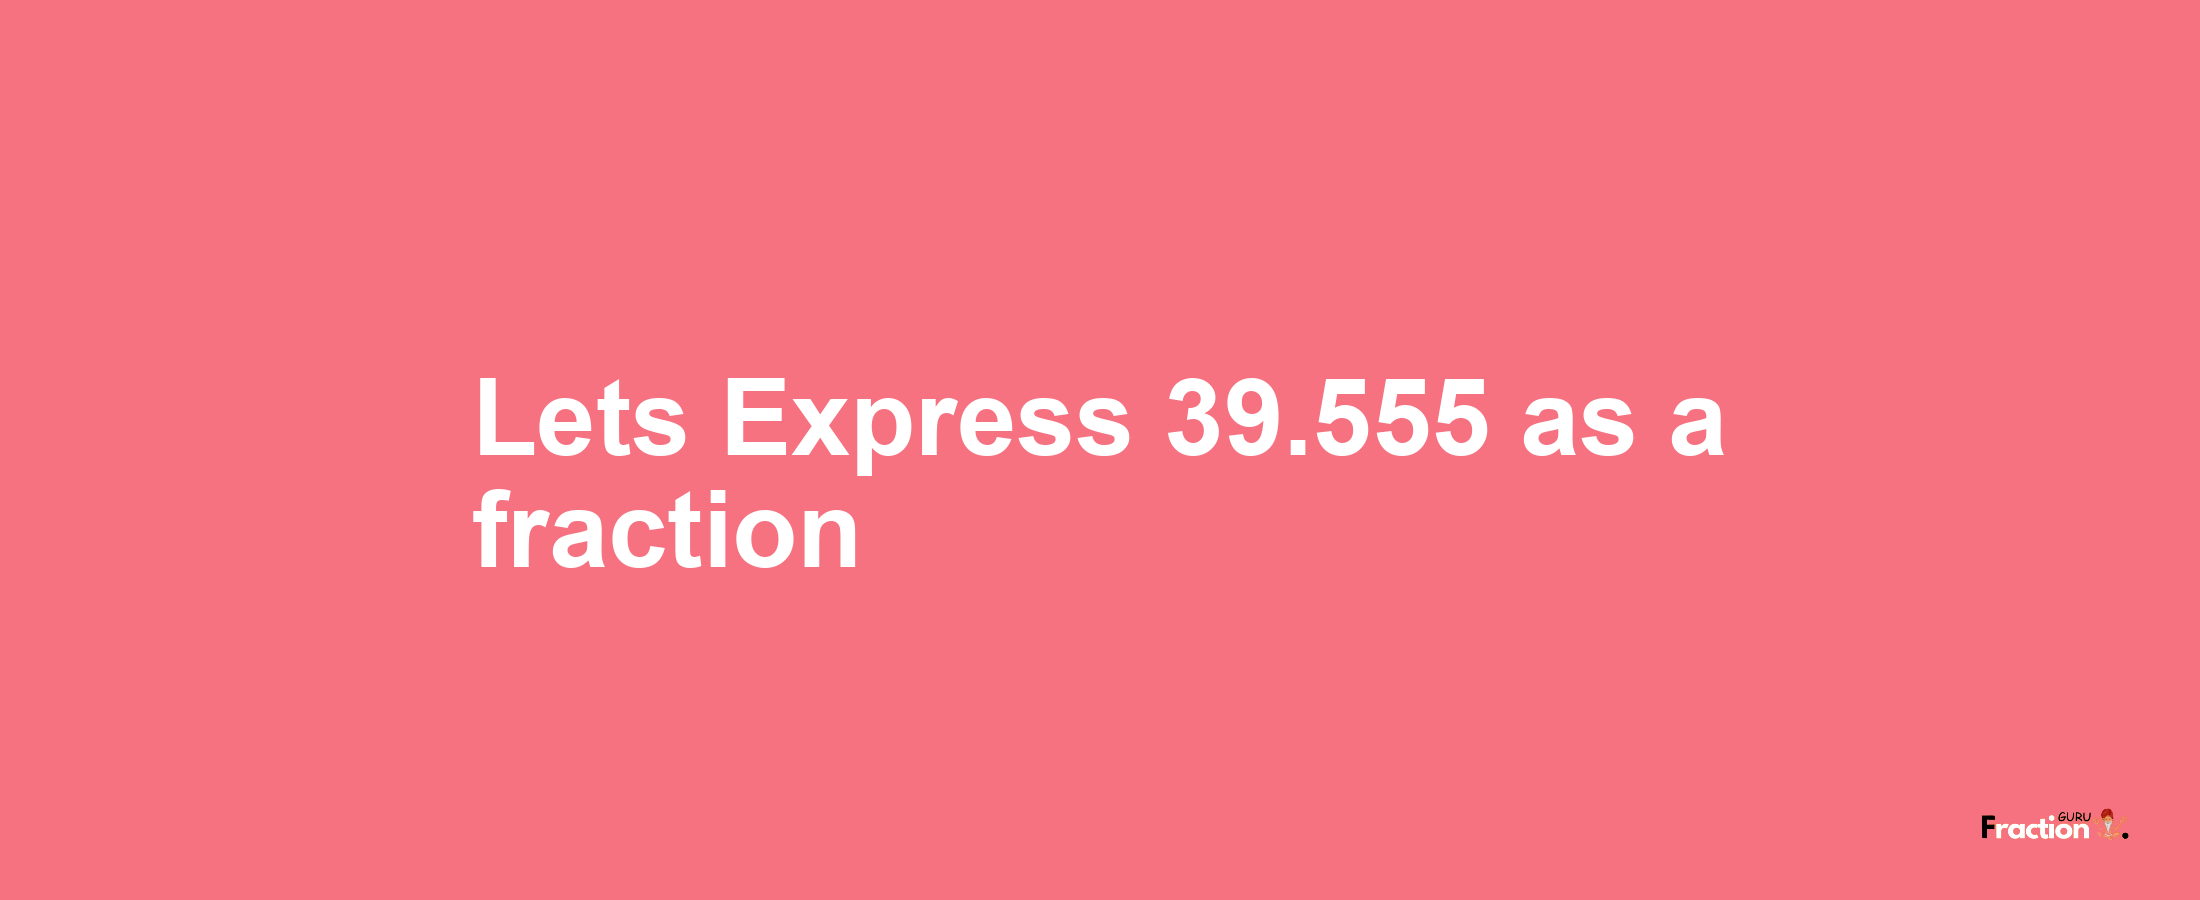 Lets Express 39.555 as afraction